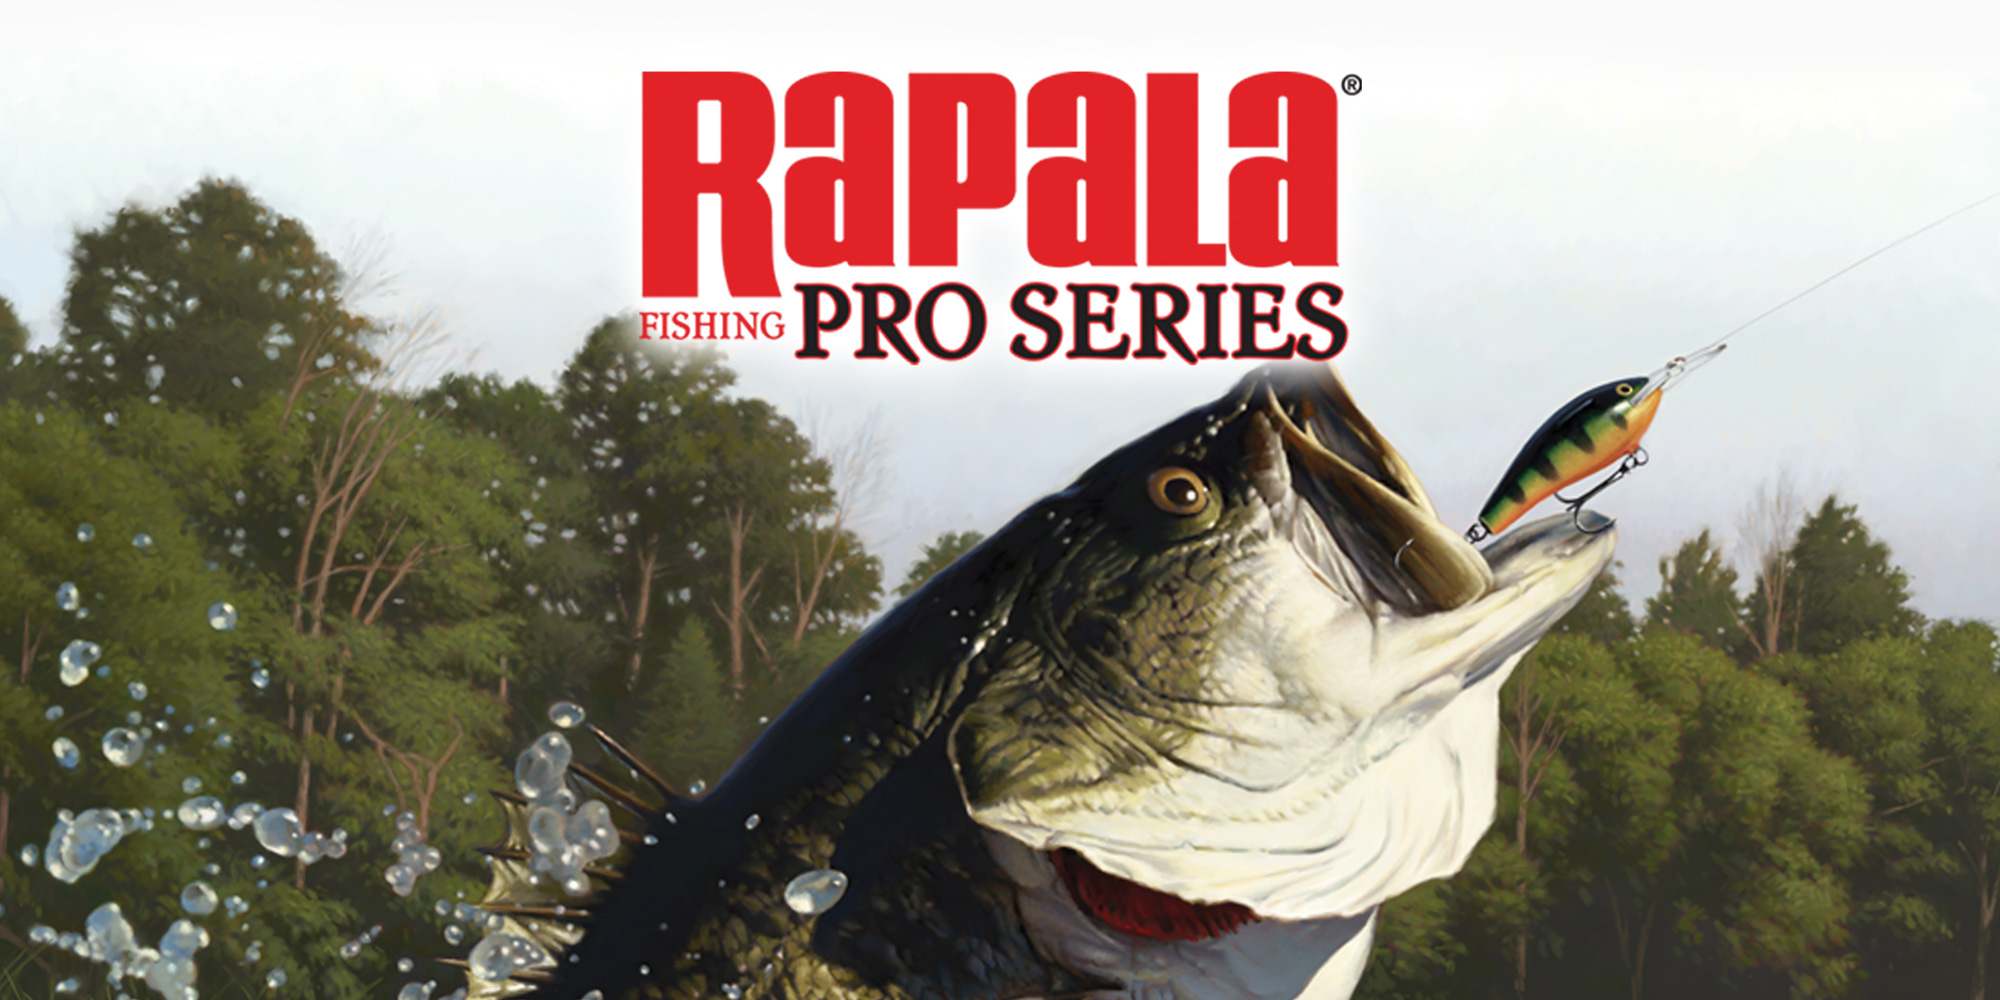 Rapala Fishing Pro Series Review - All About That Bass